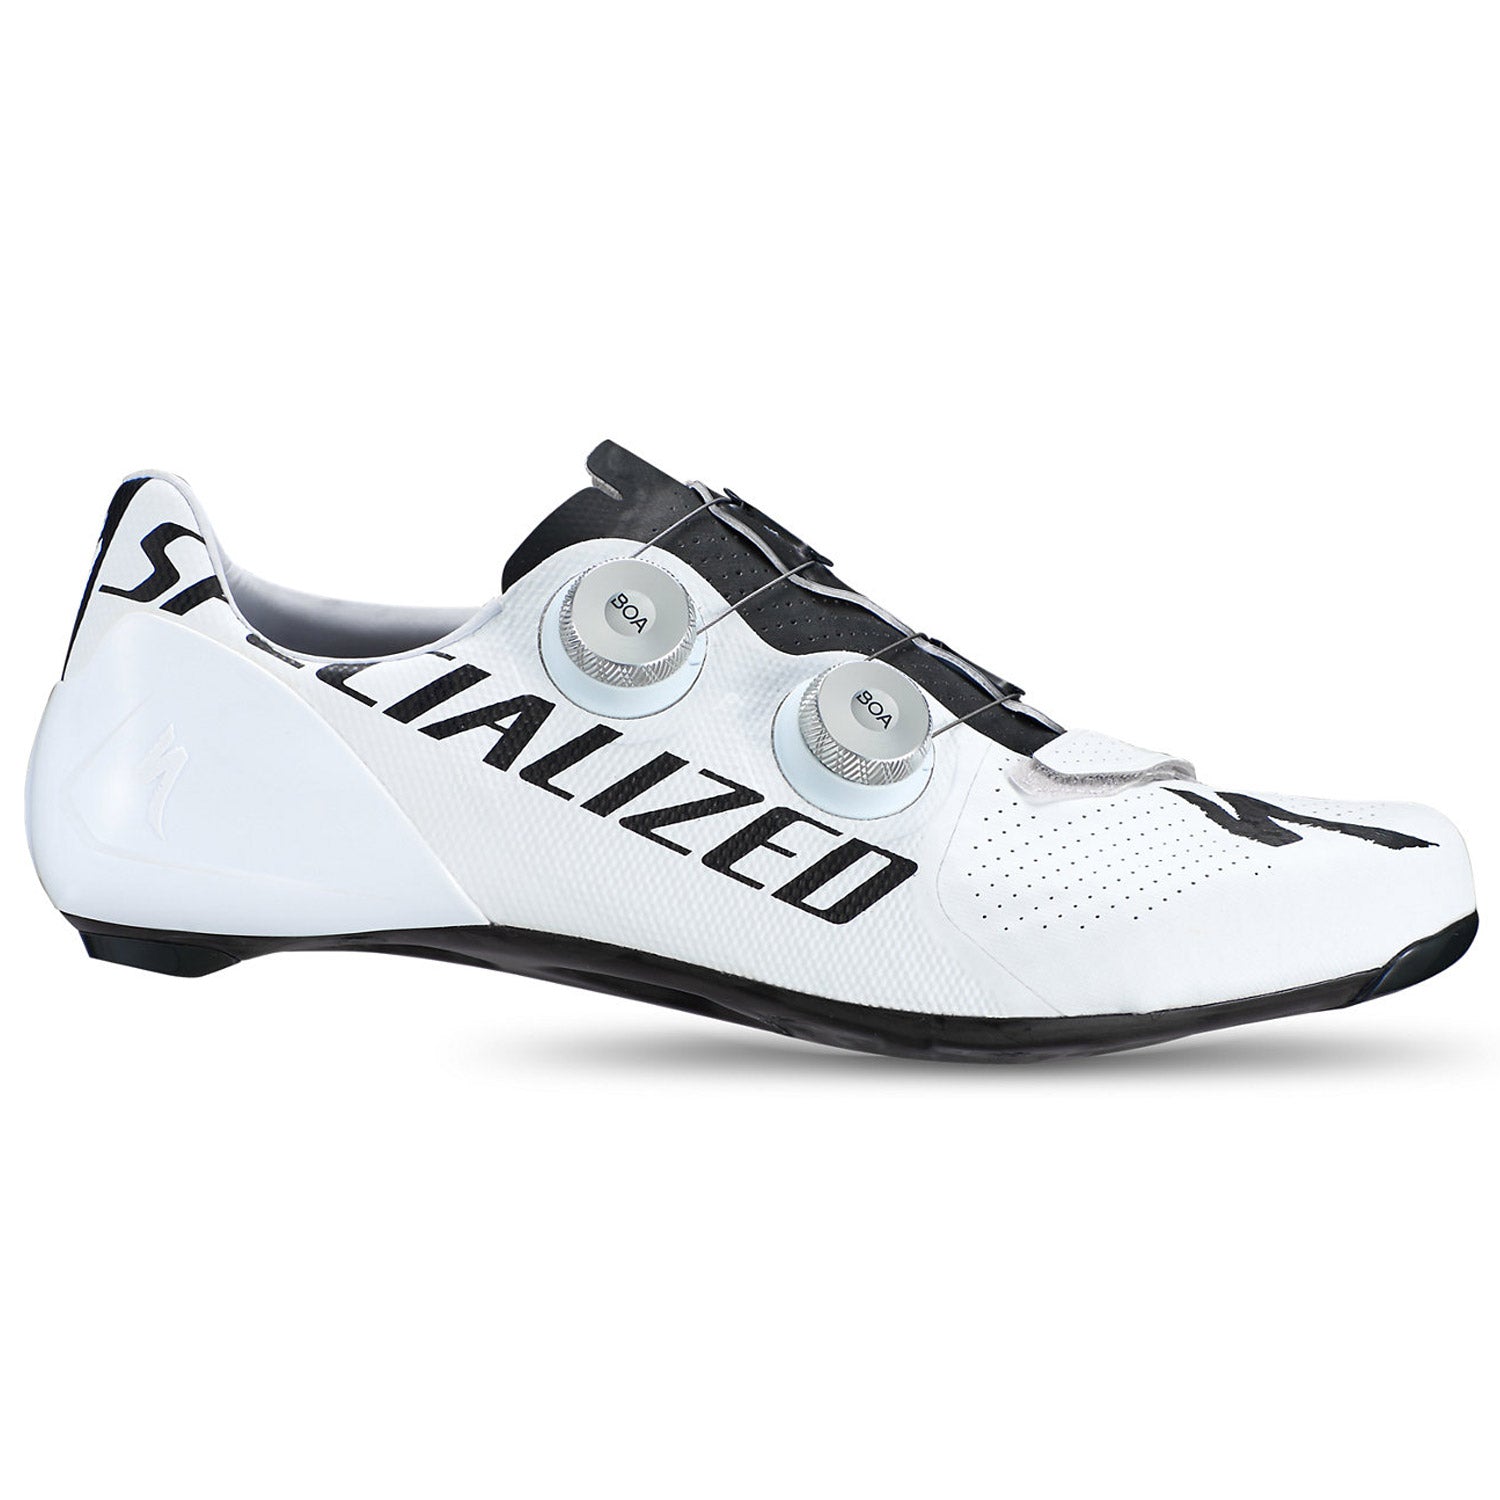 Specialized S-Works 7 shoes - White | All4cycling